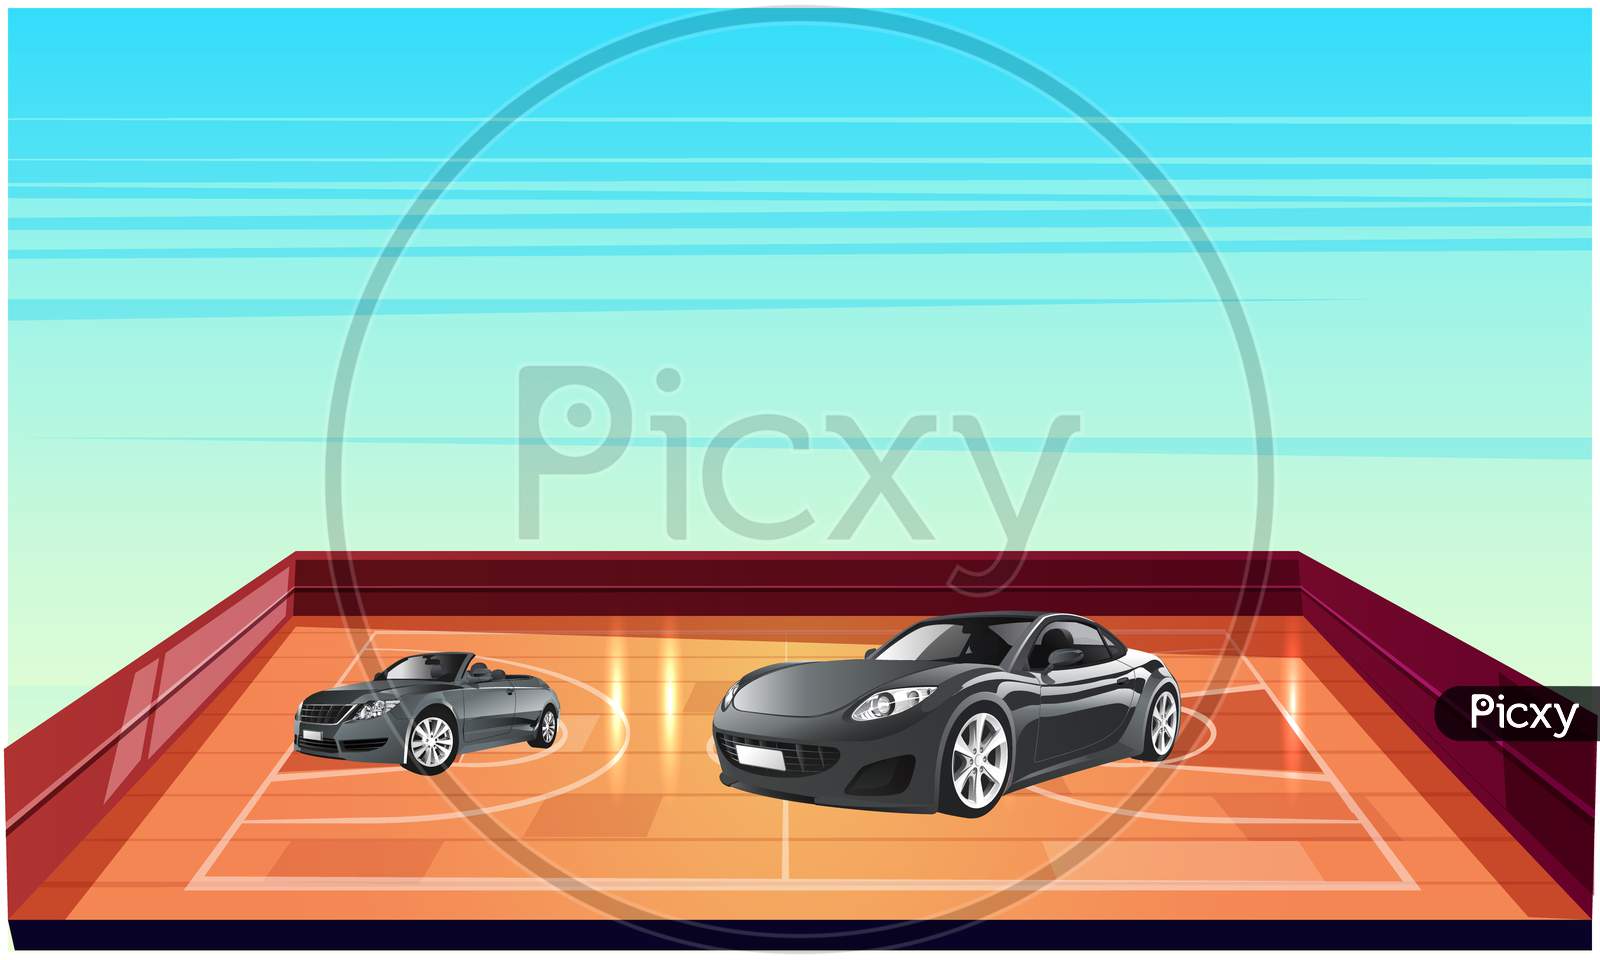 Mock Up Illustration Of Cars Parked In A Basketball Court